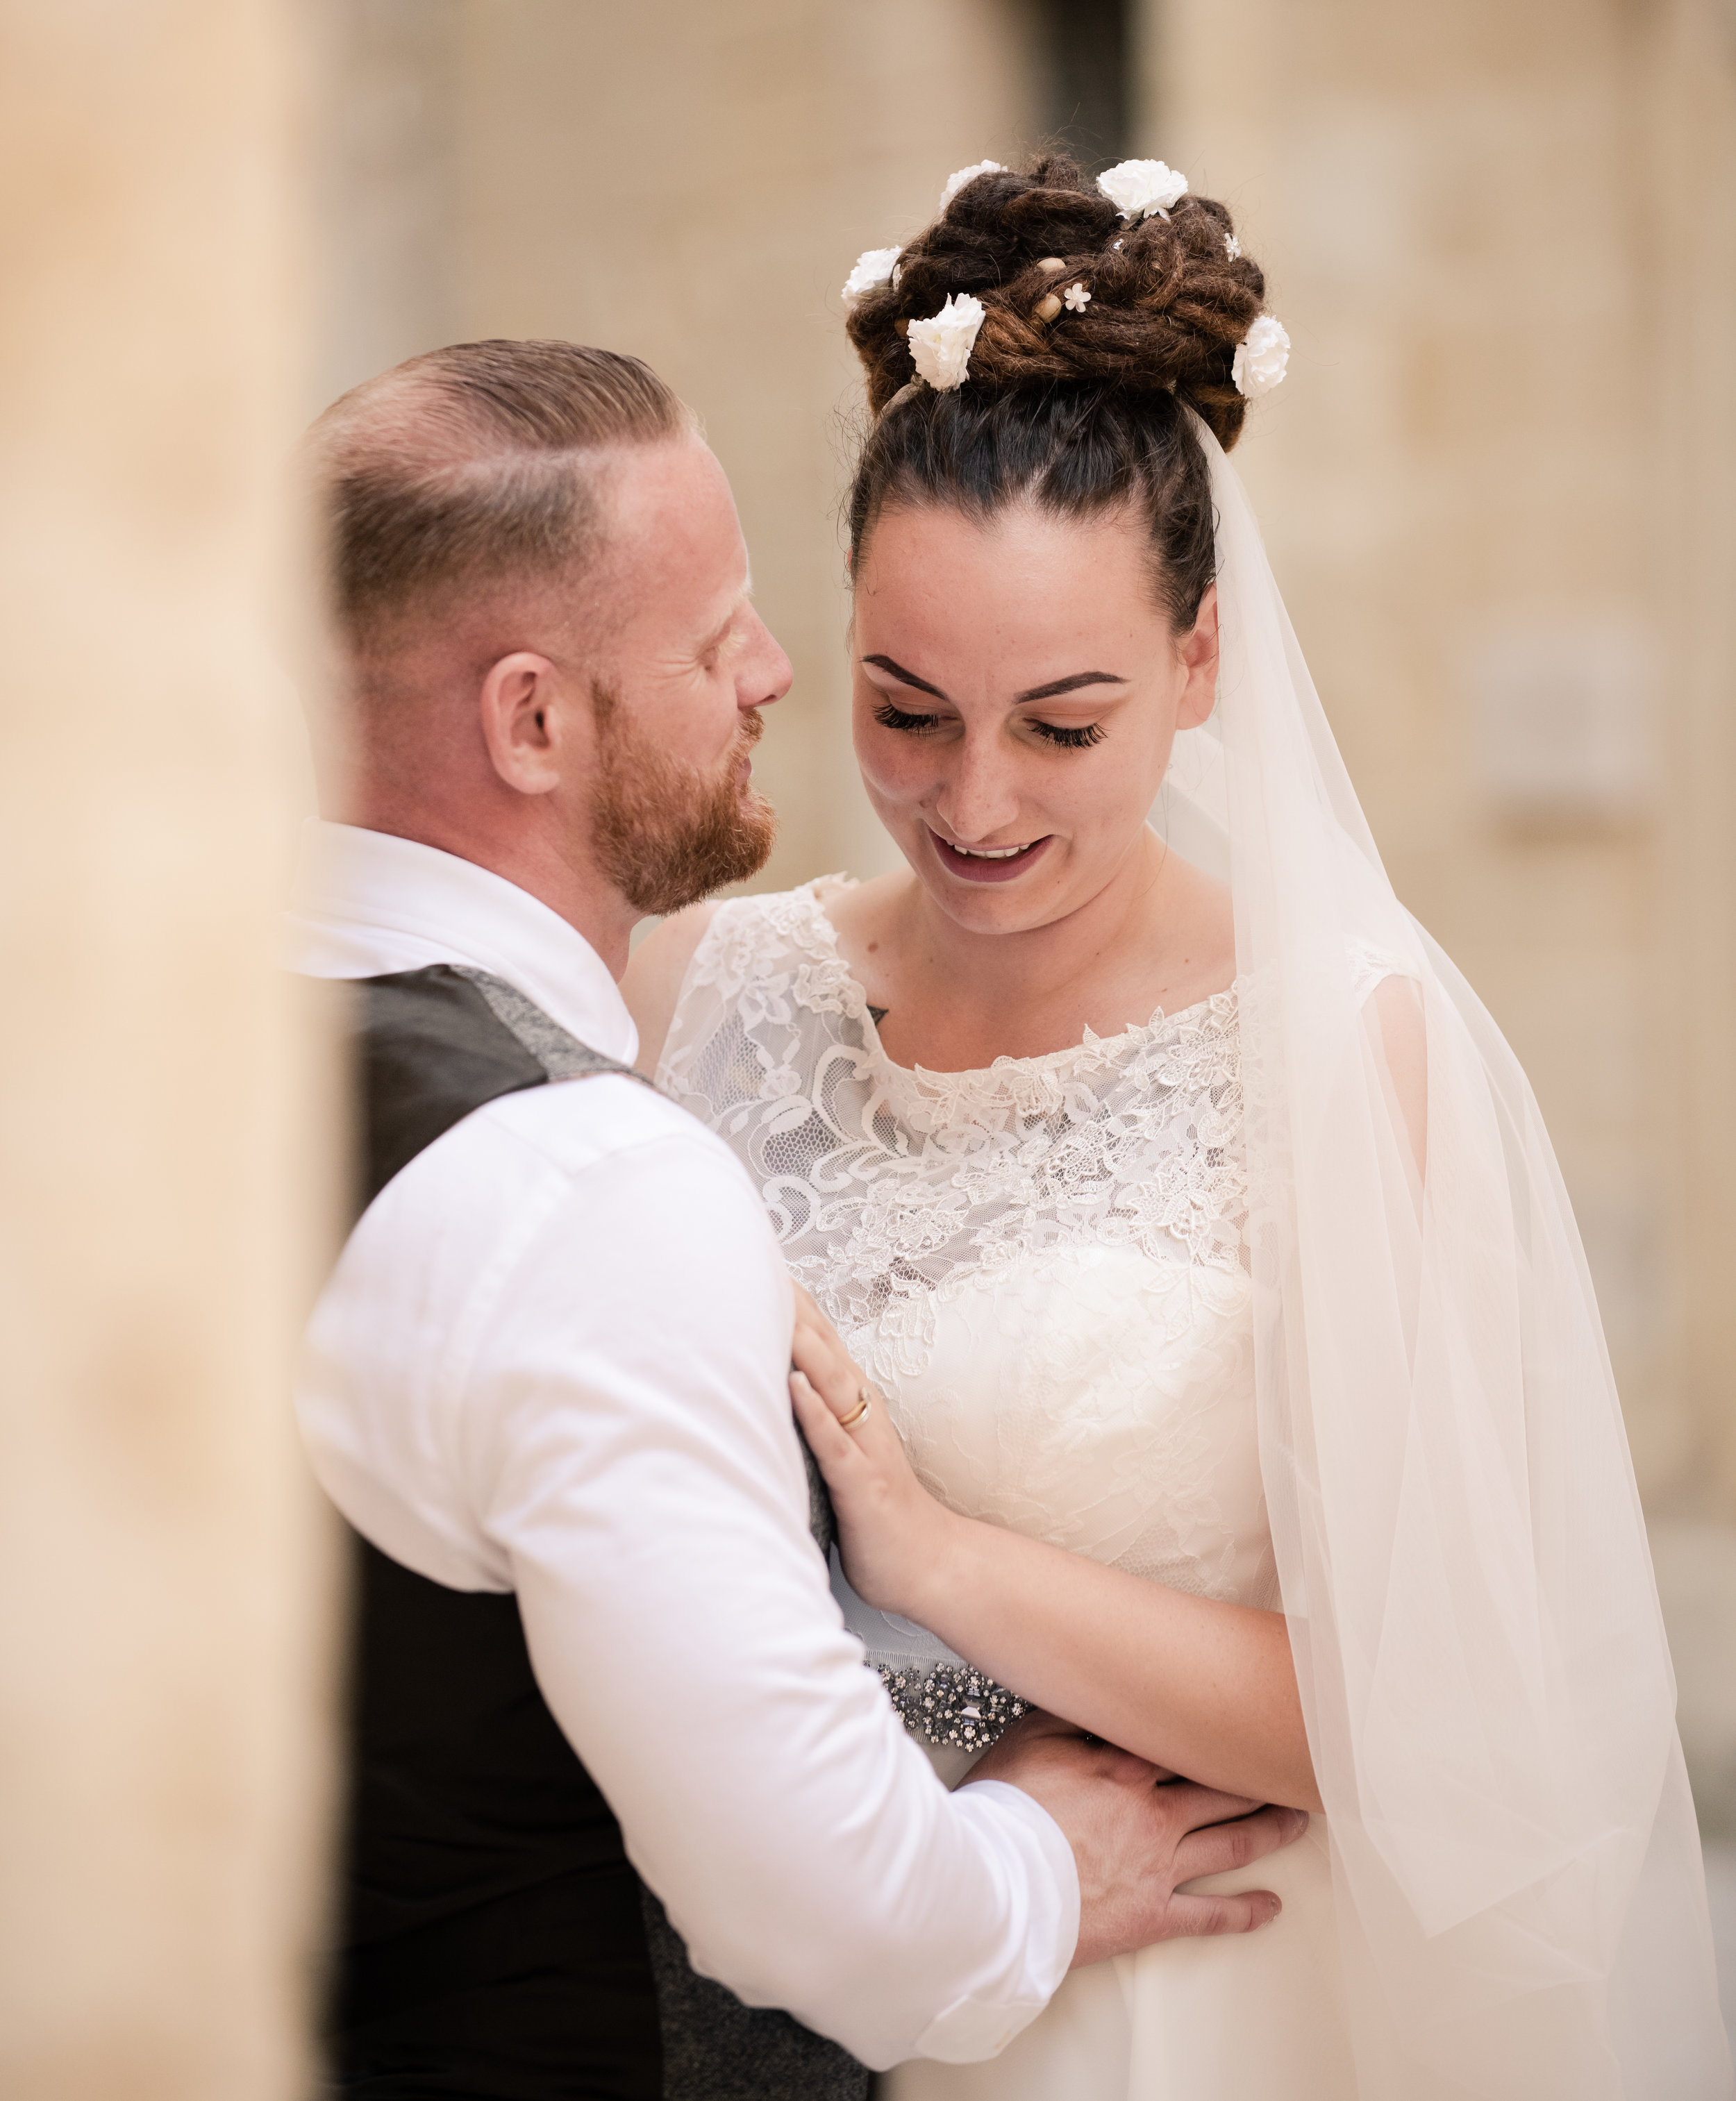 Wedding photographer UK, wedding photographer Manchester, wedding photographer Cheshire, wedding photographer and videographer